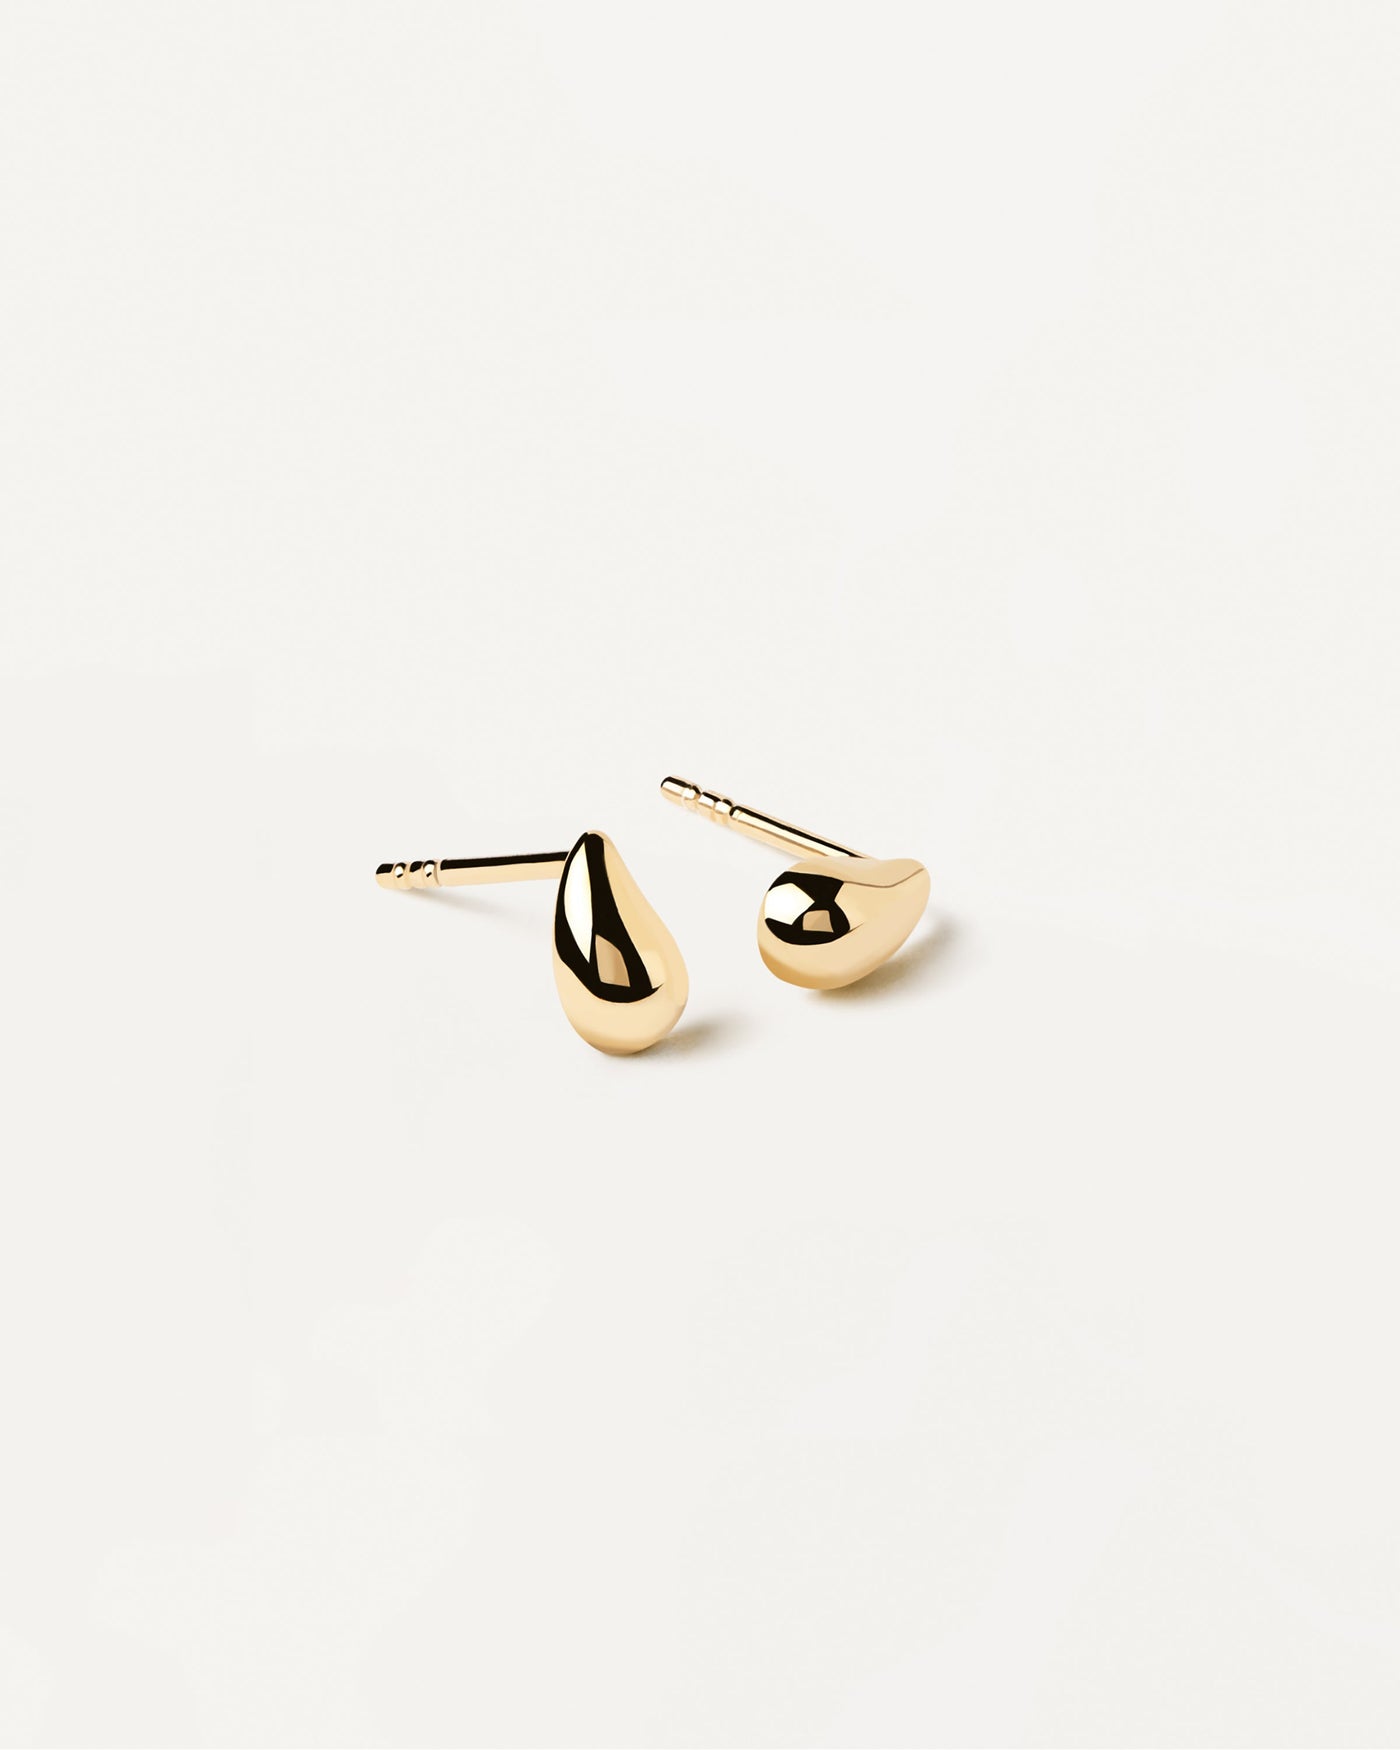 2023 Selection | Drop Earrings. Gold-plated silver earrings in drop shape. Get the latest arrival from PDPAOLA. Place your order safely and get this Best Seller. Free Shipping.